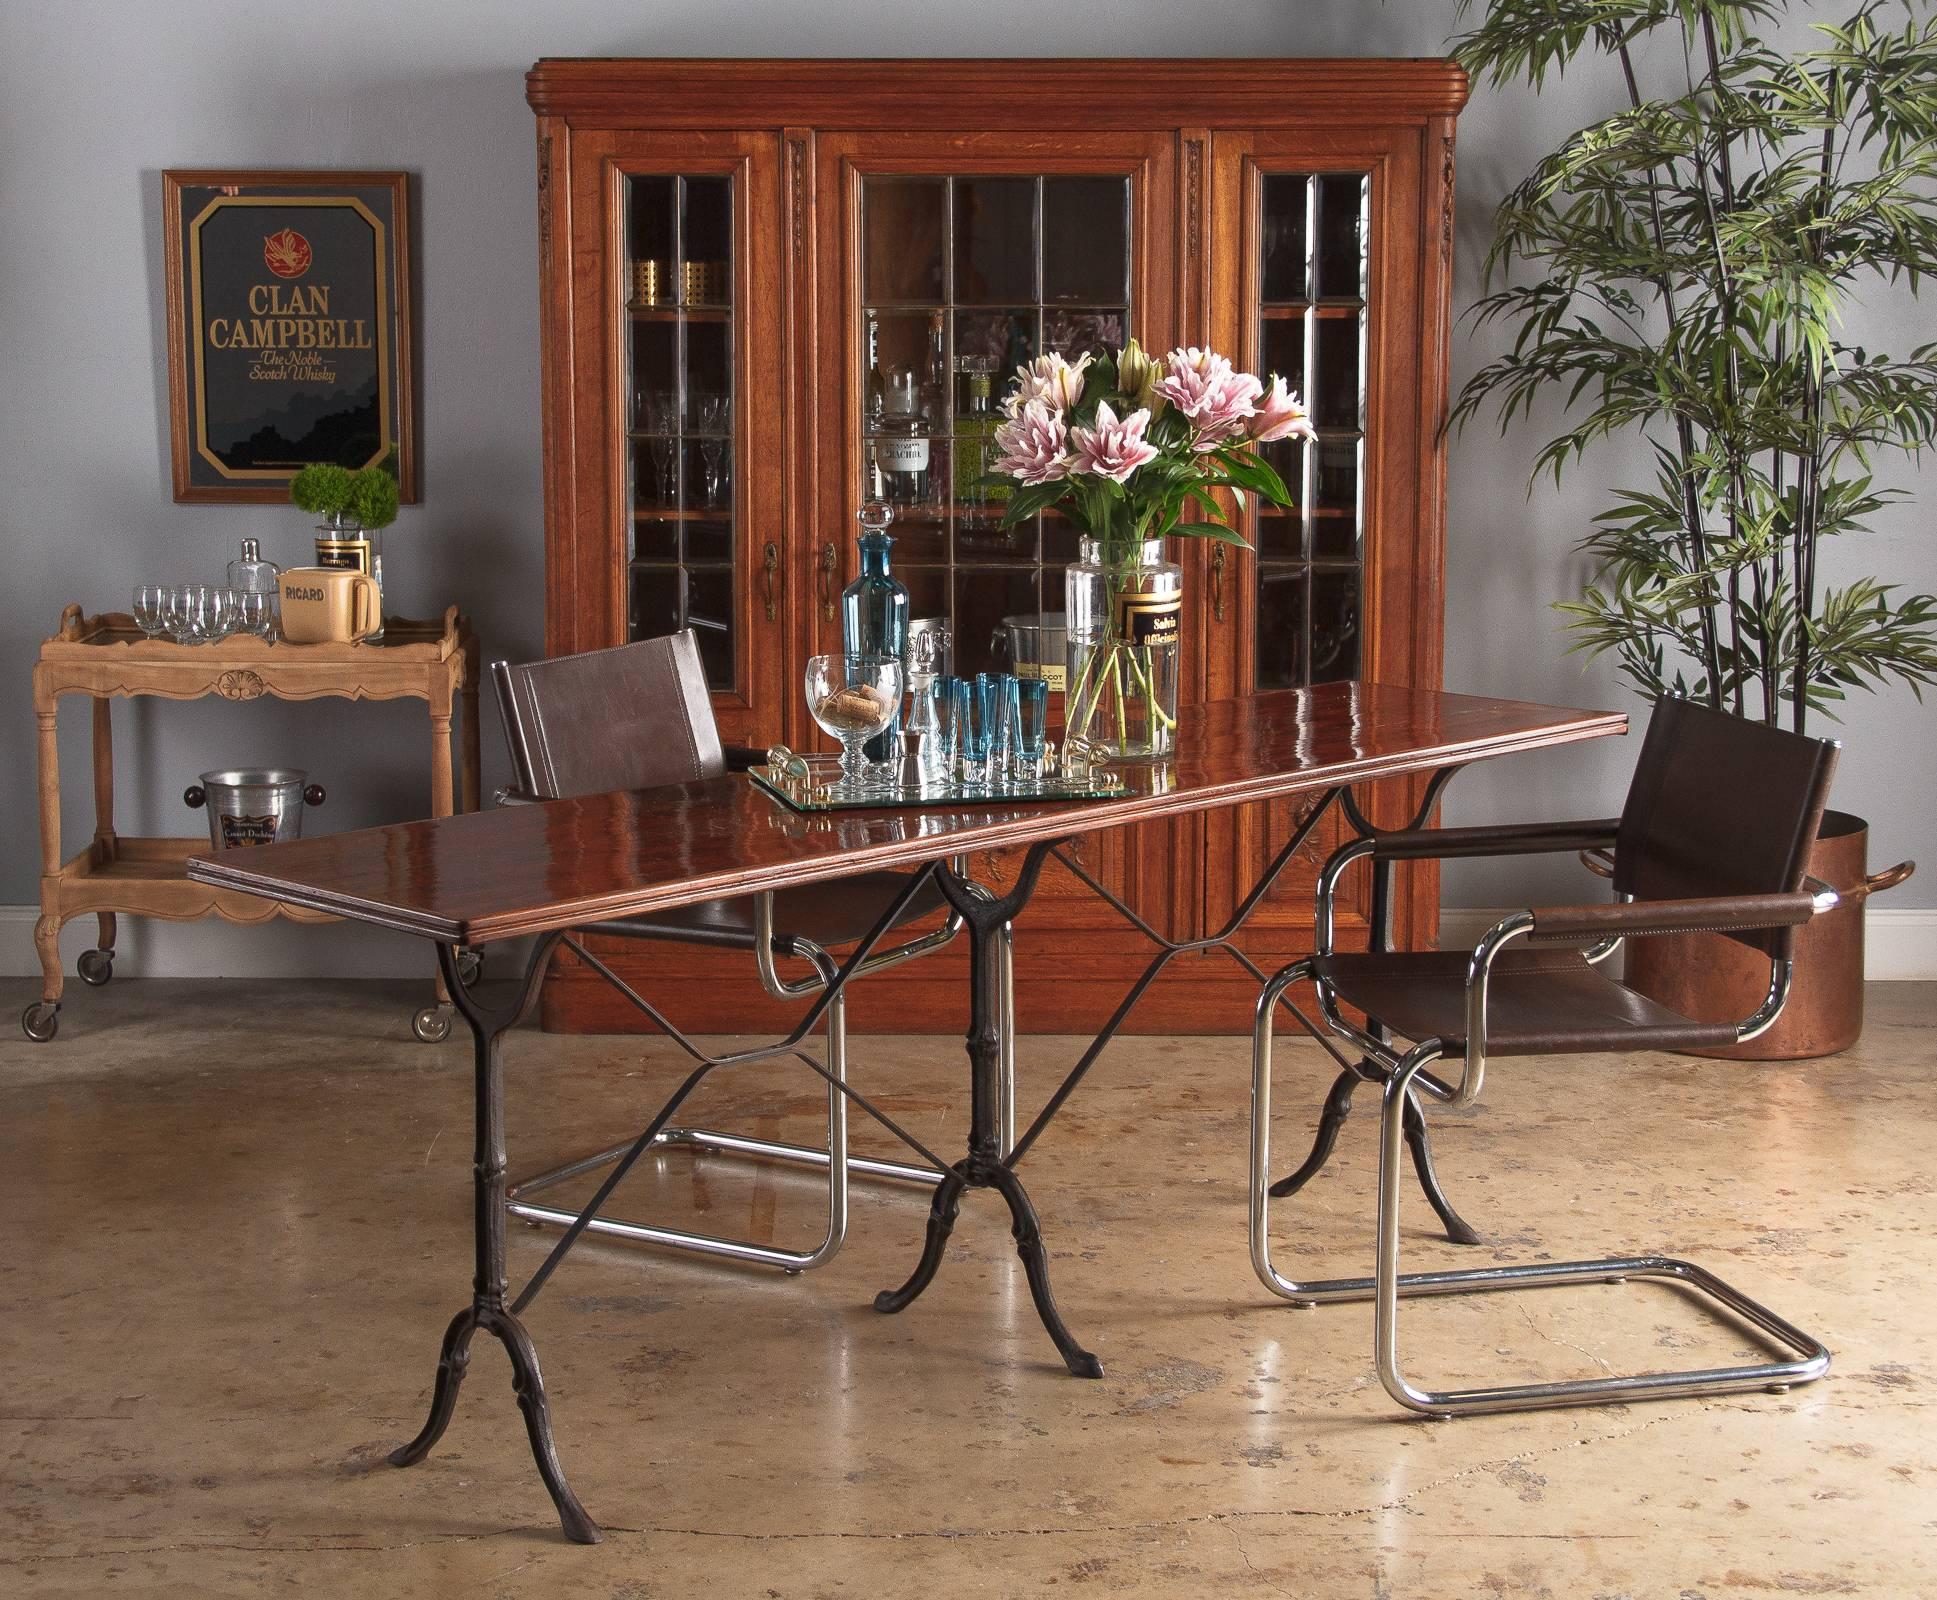 A long French bistro table with lacquered wood top and wrought iron legs, vintage, circa 1920s. The narrow pine top has a red-toned lacquer and high gloss finish. Molded wood edges are affixed to the sides along the table. Three sets of dainty black